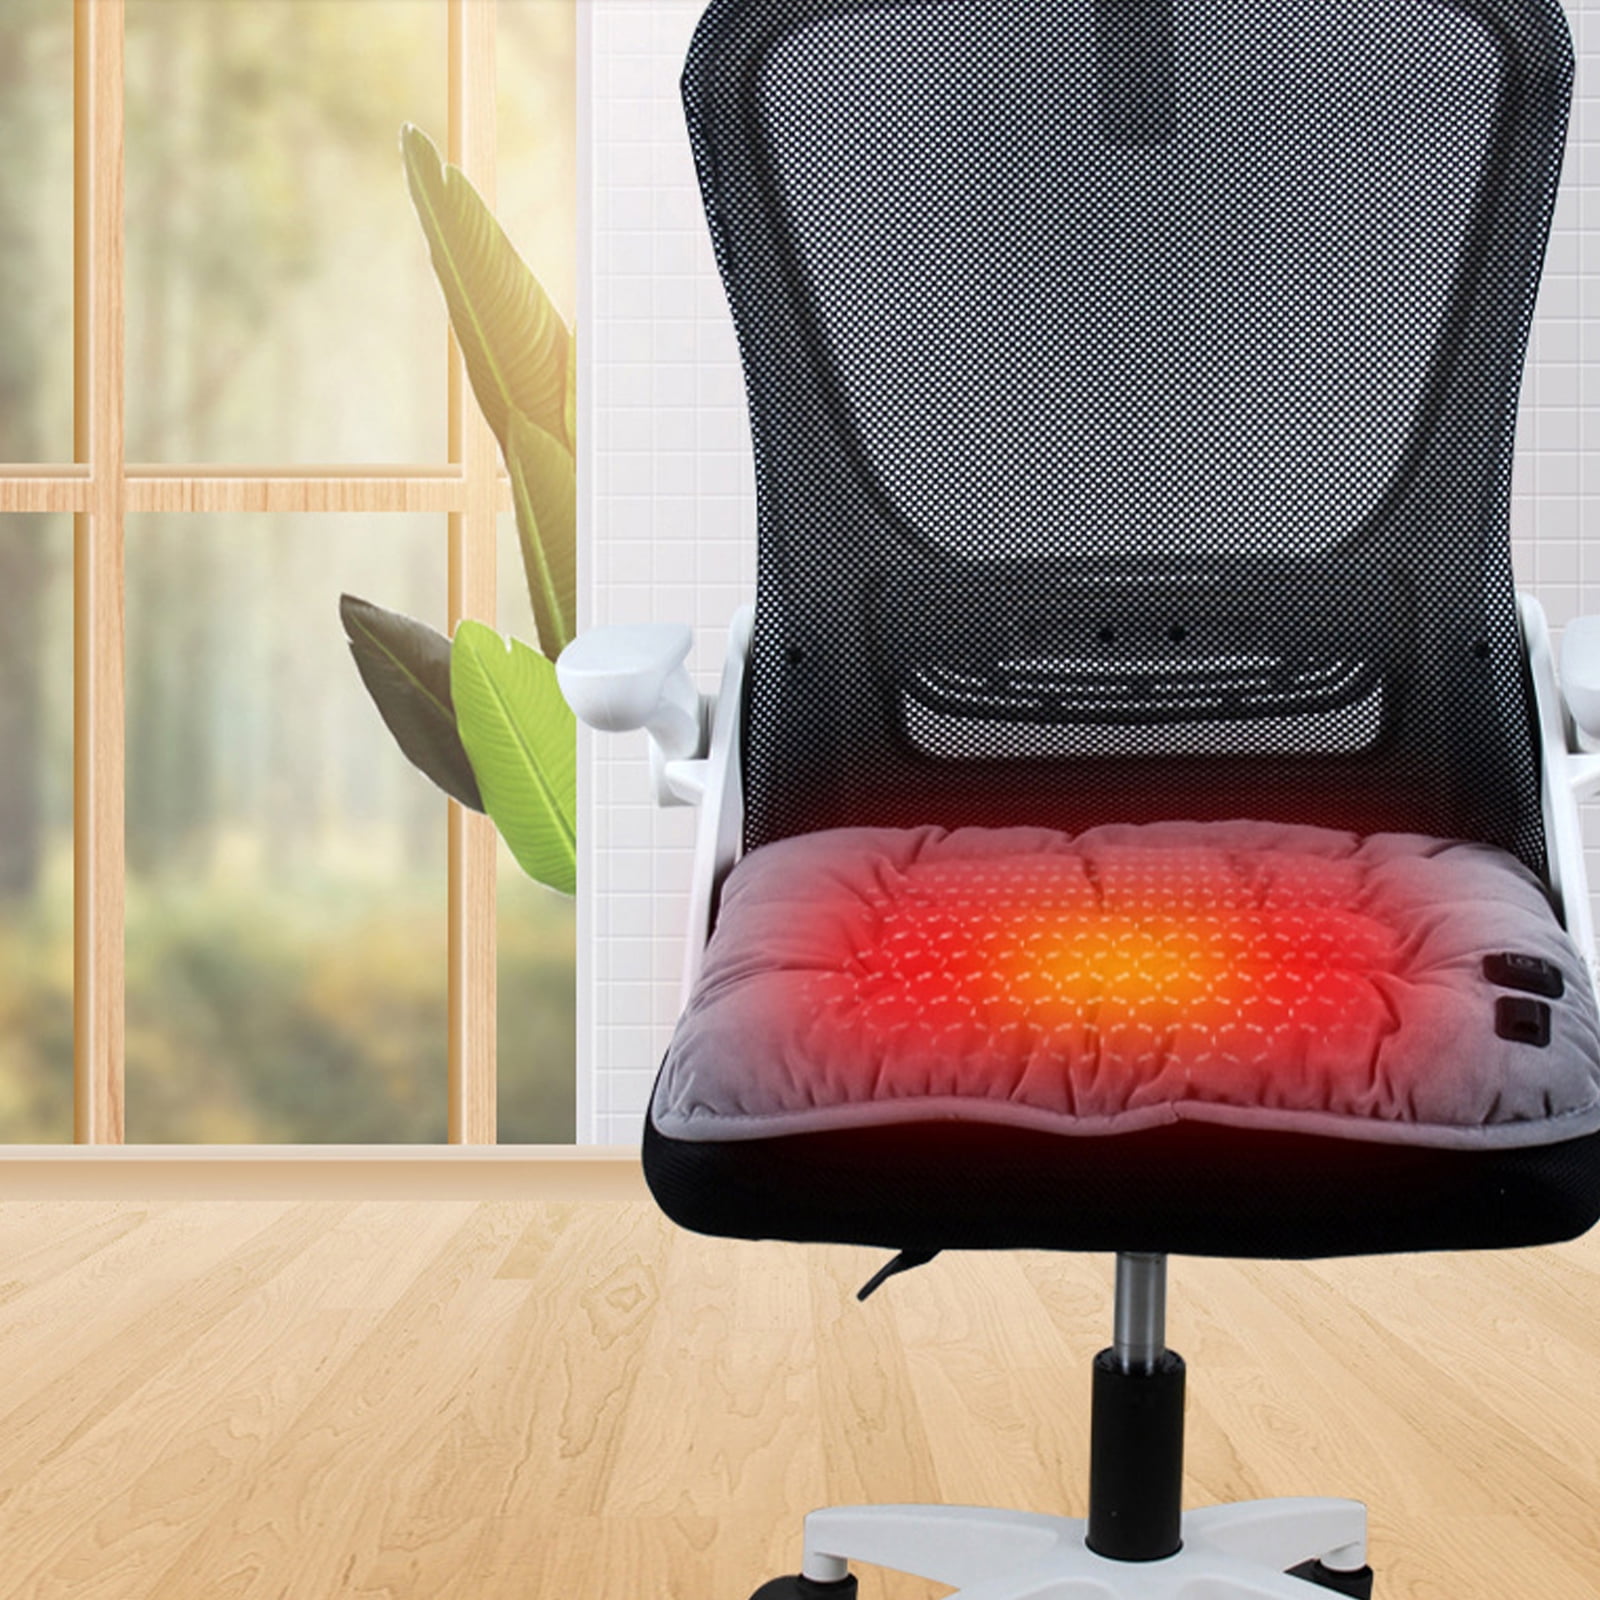 USB Heated Seat Cushion for Office Chair, Large Heating Area Heated Seat  Cover Therapy Heating Pad for Back, Lumbar, Hip, Thigh with 3 Temperatures